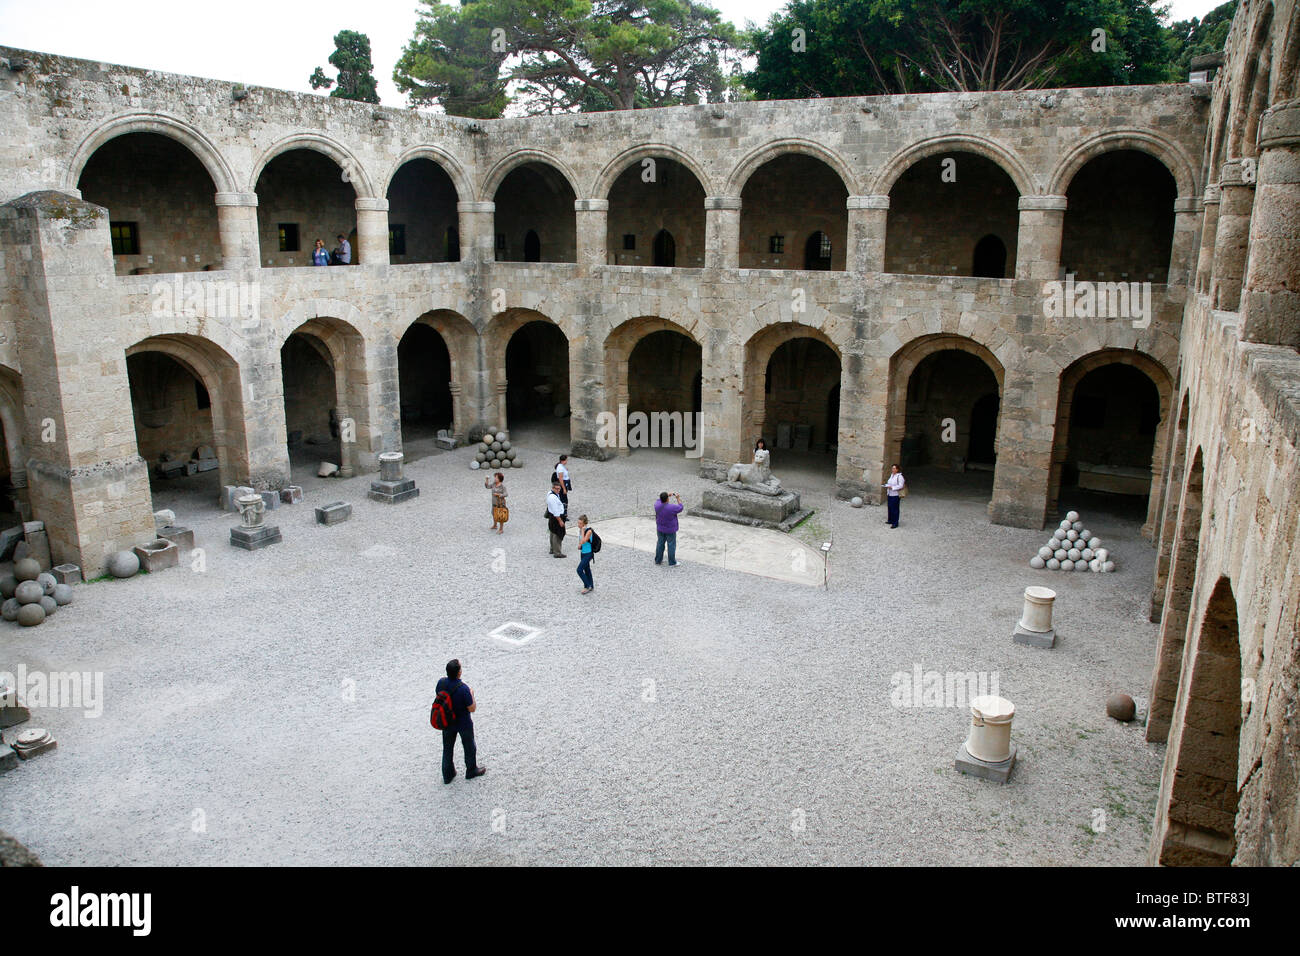 Courtyard of the Archeological museum in Rhodes old Town, Rhodes, Greece. Stock Photo